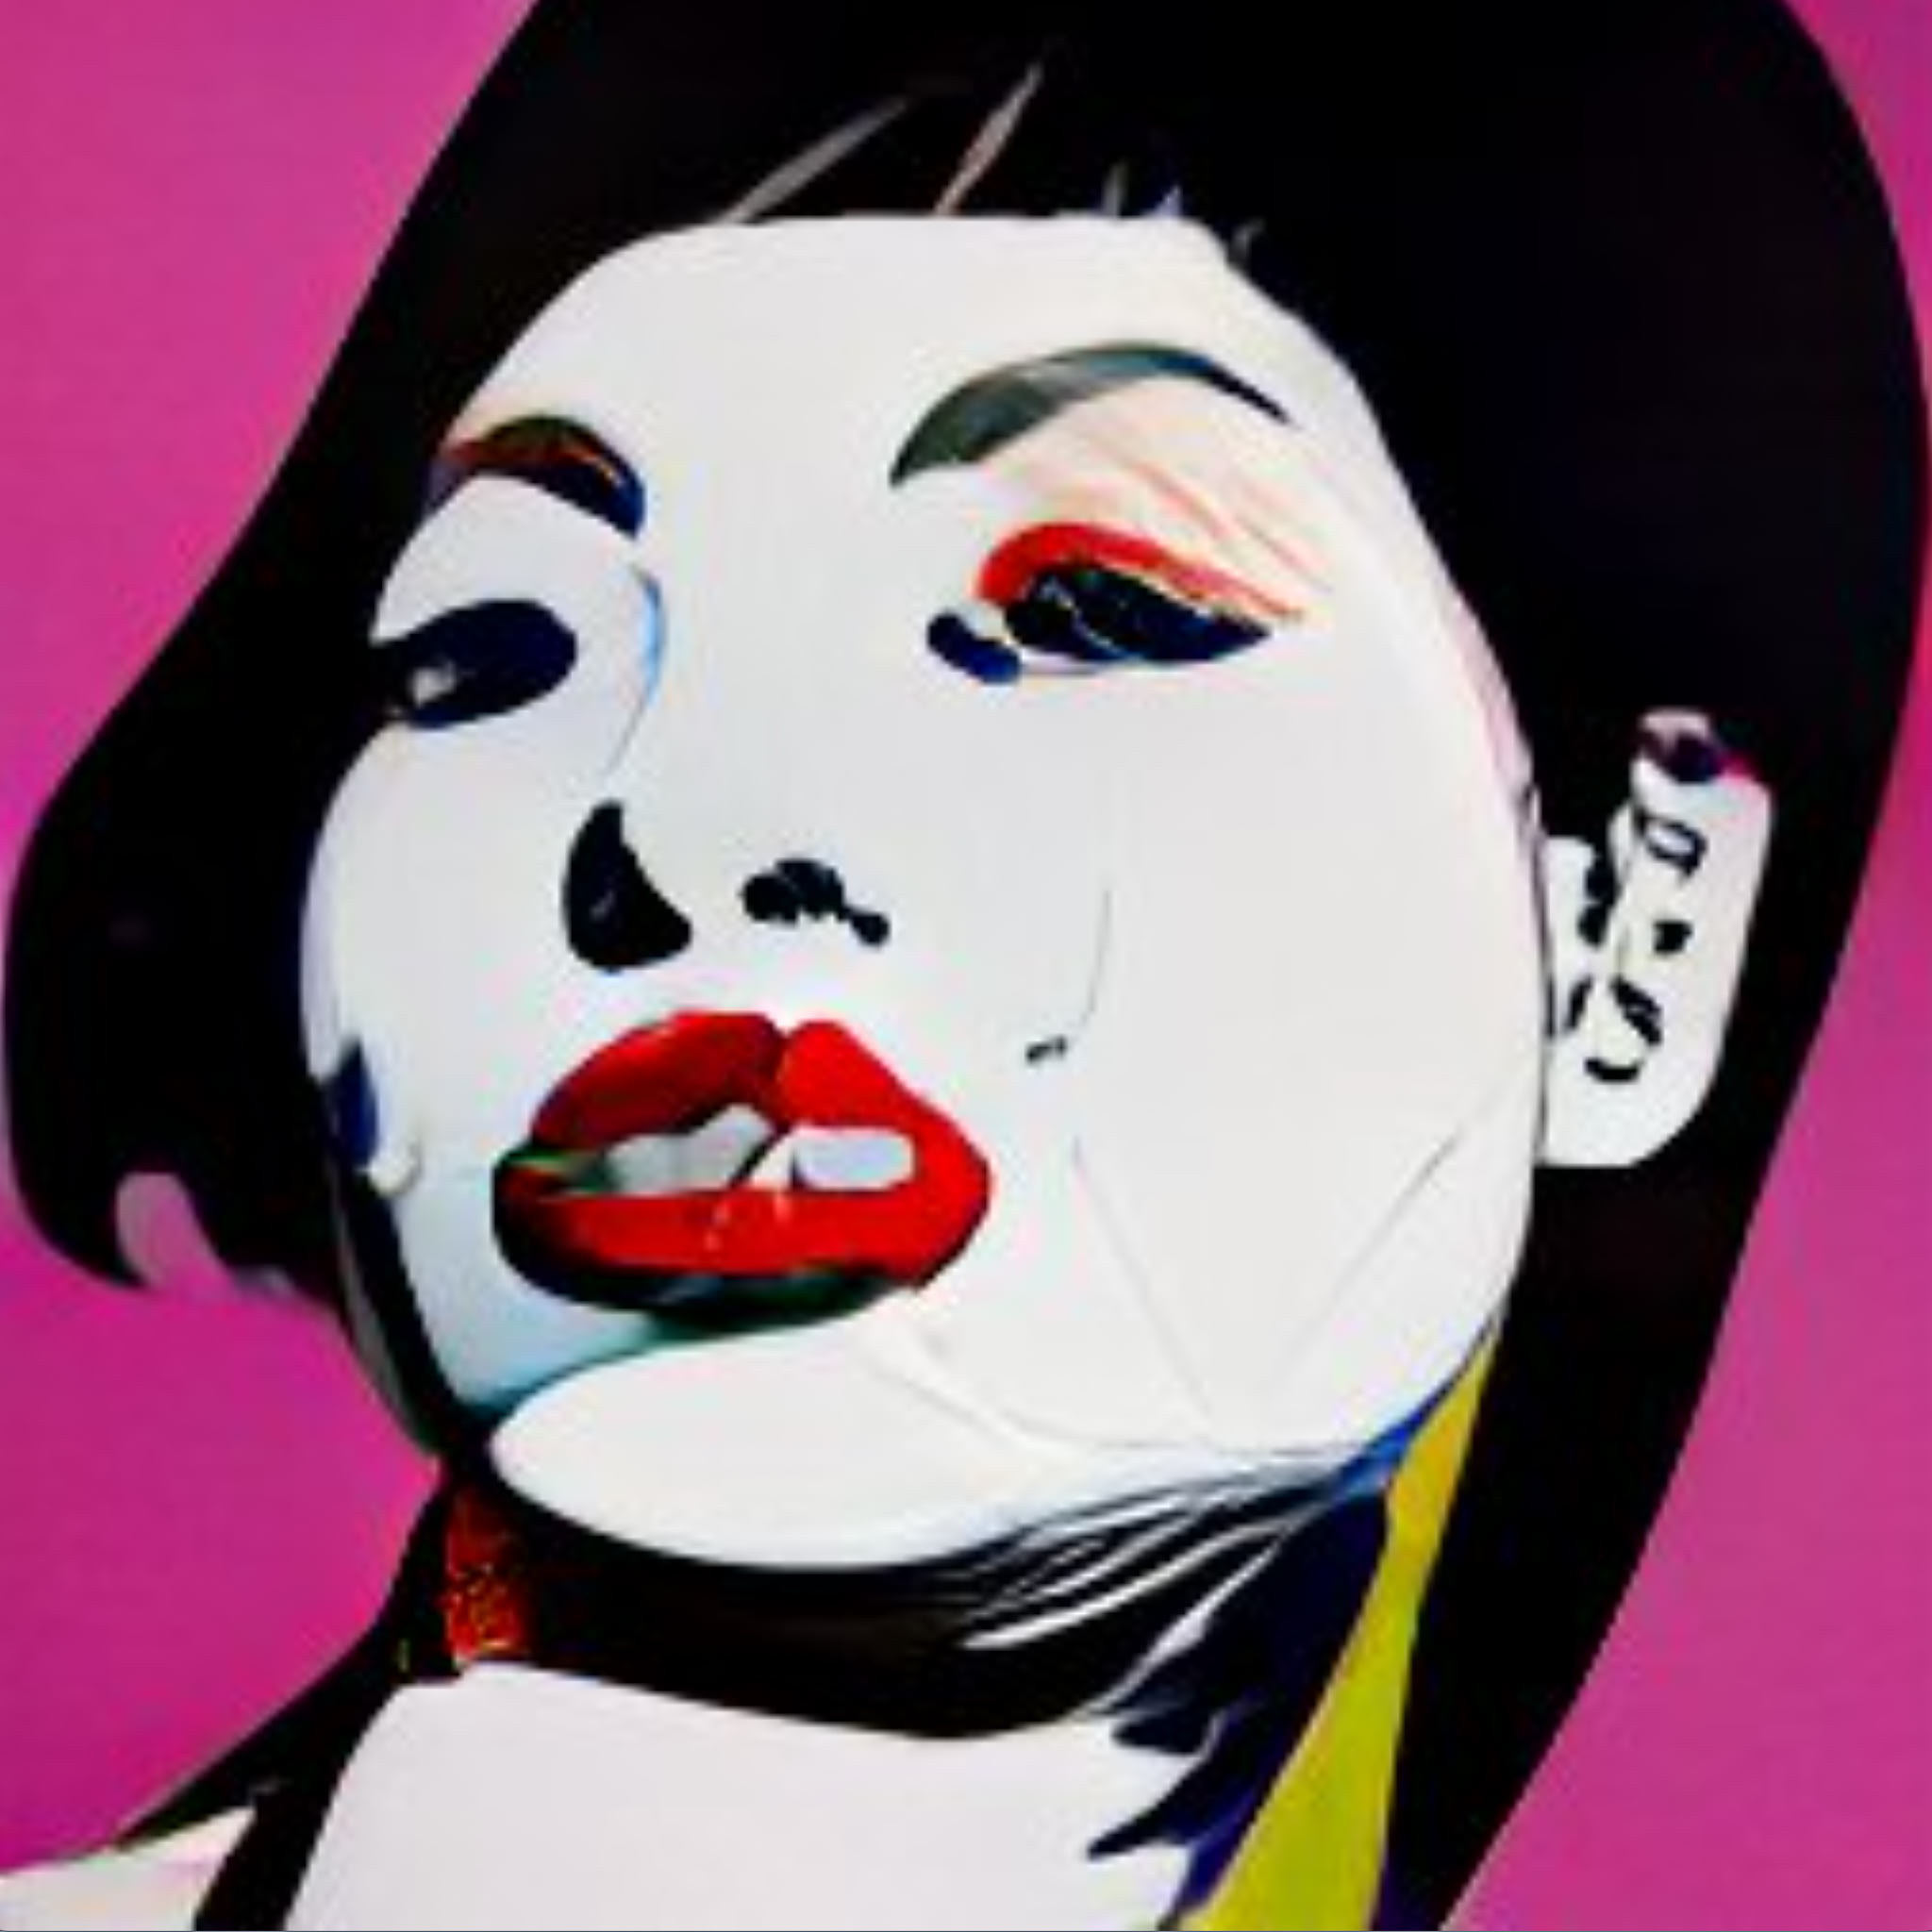 photorealstic-portrait-of-a-japanese-woman-with-red-lips-in-pop-art